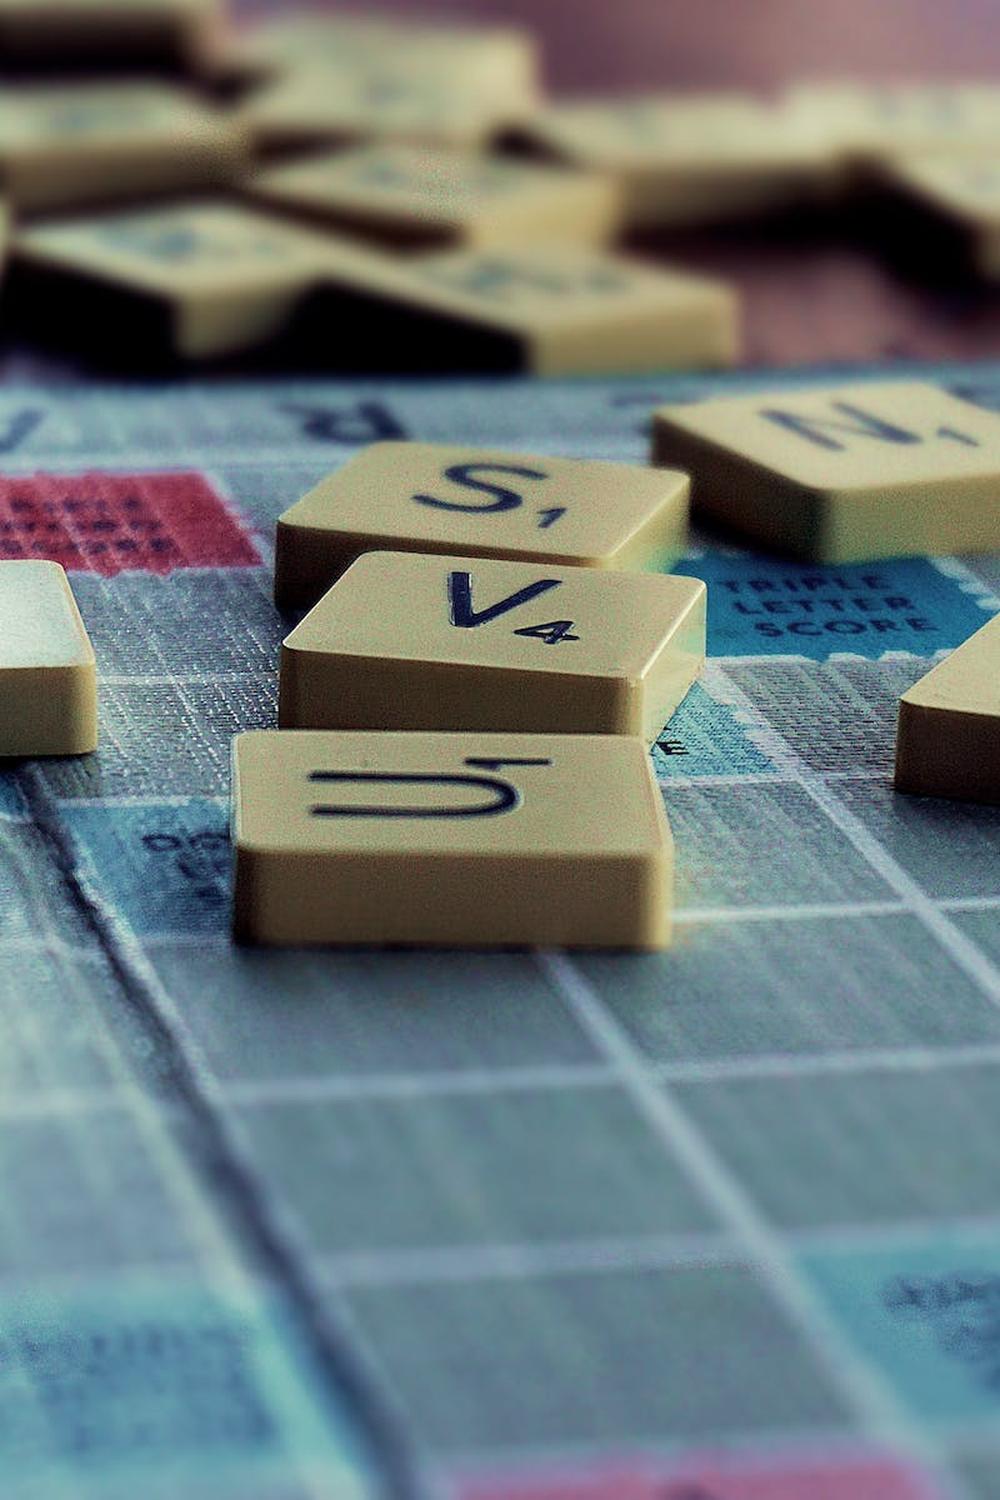 scrabble_board_game_on_shallow_focus_lens